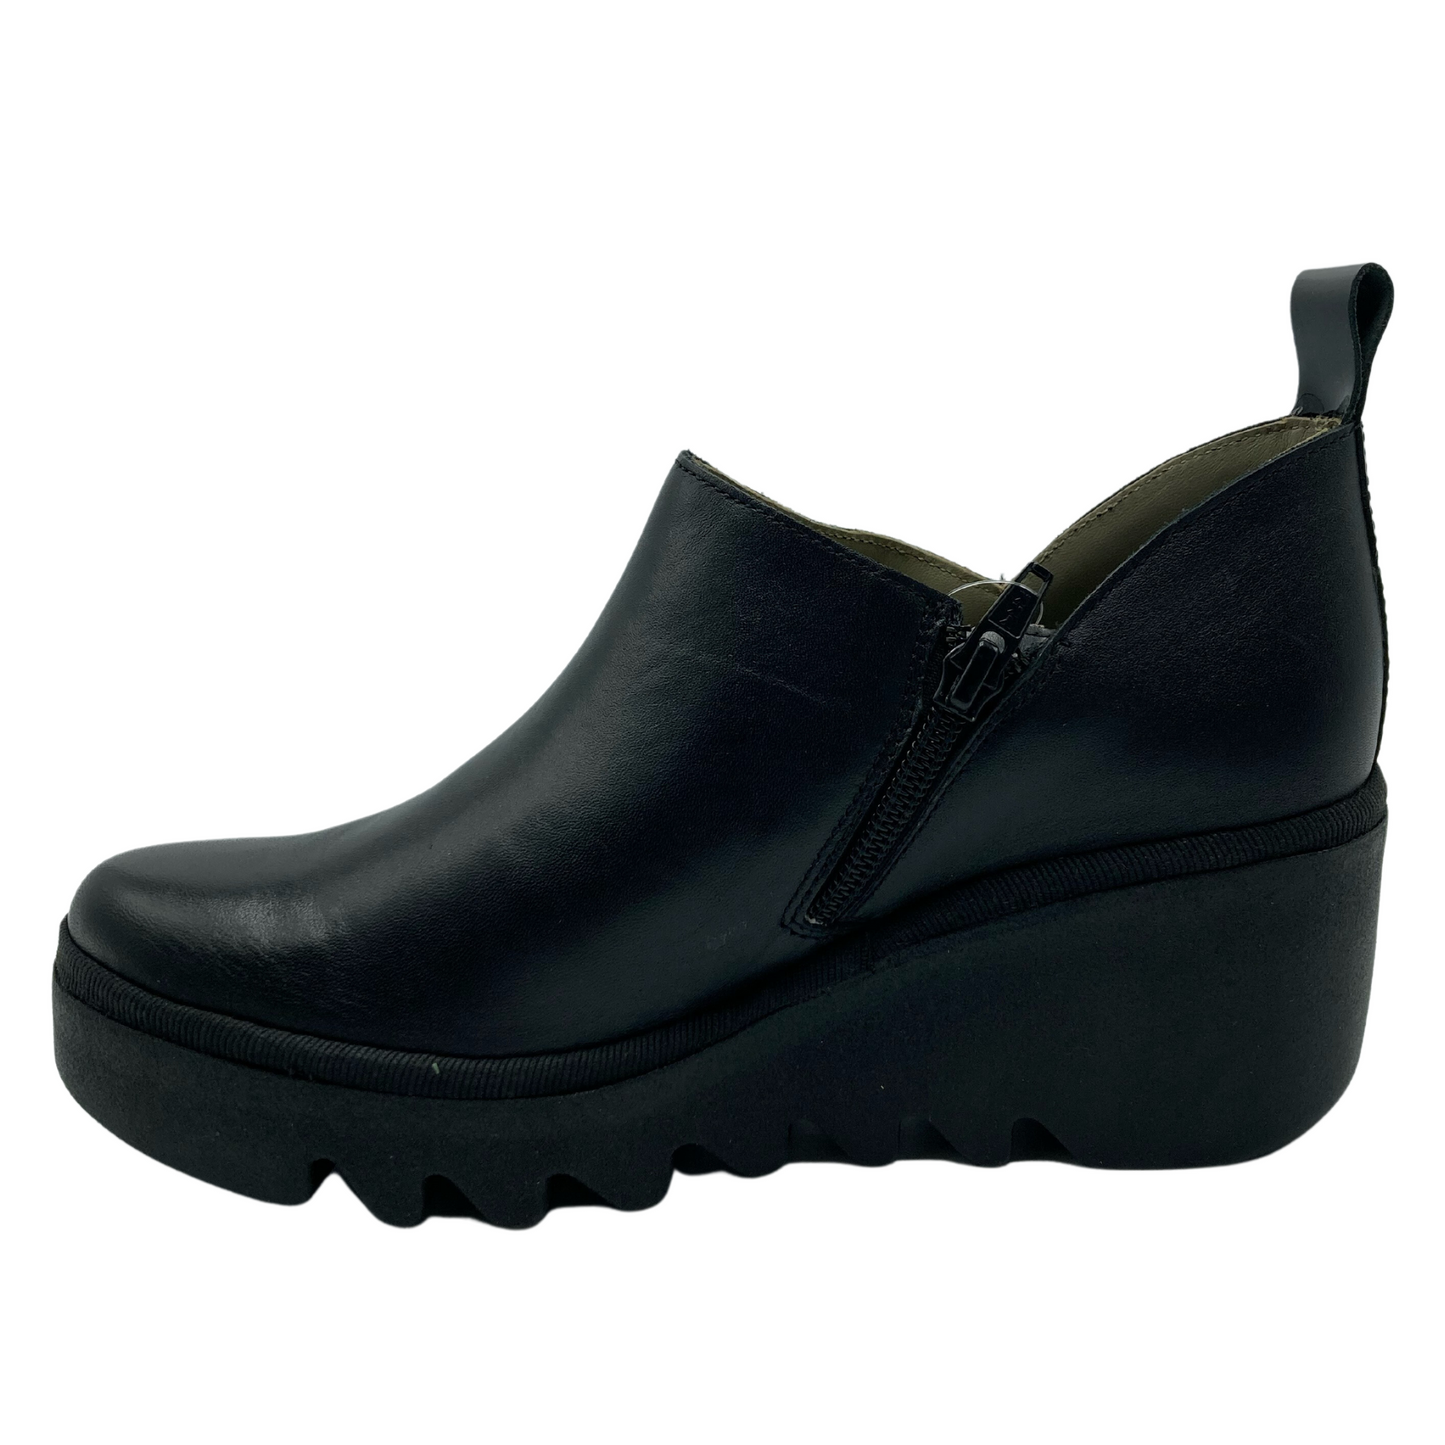 Left facing view of black leather wedge bootie with heel pull tab and zipper closure on the side